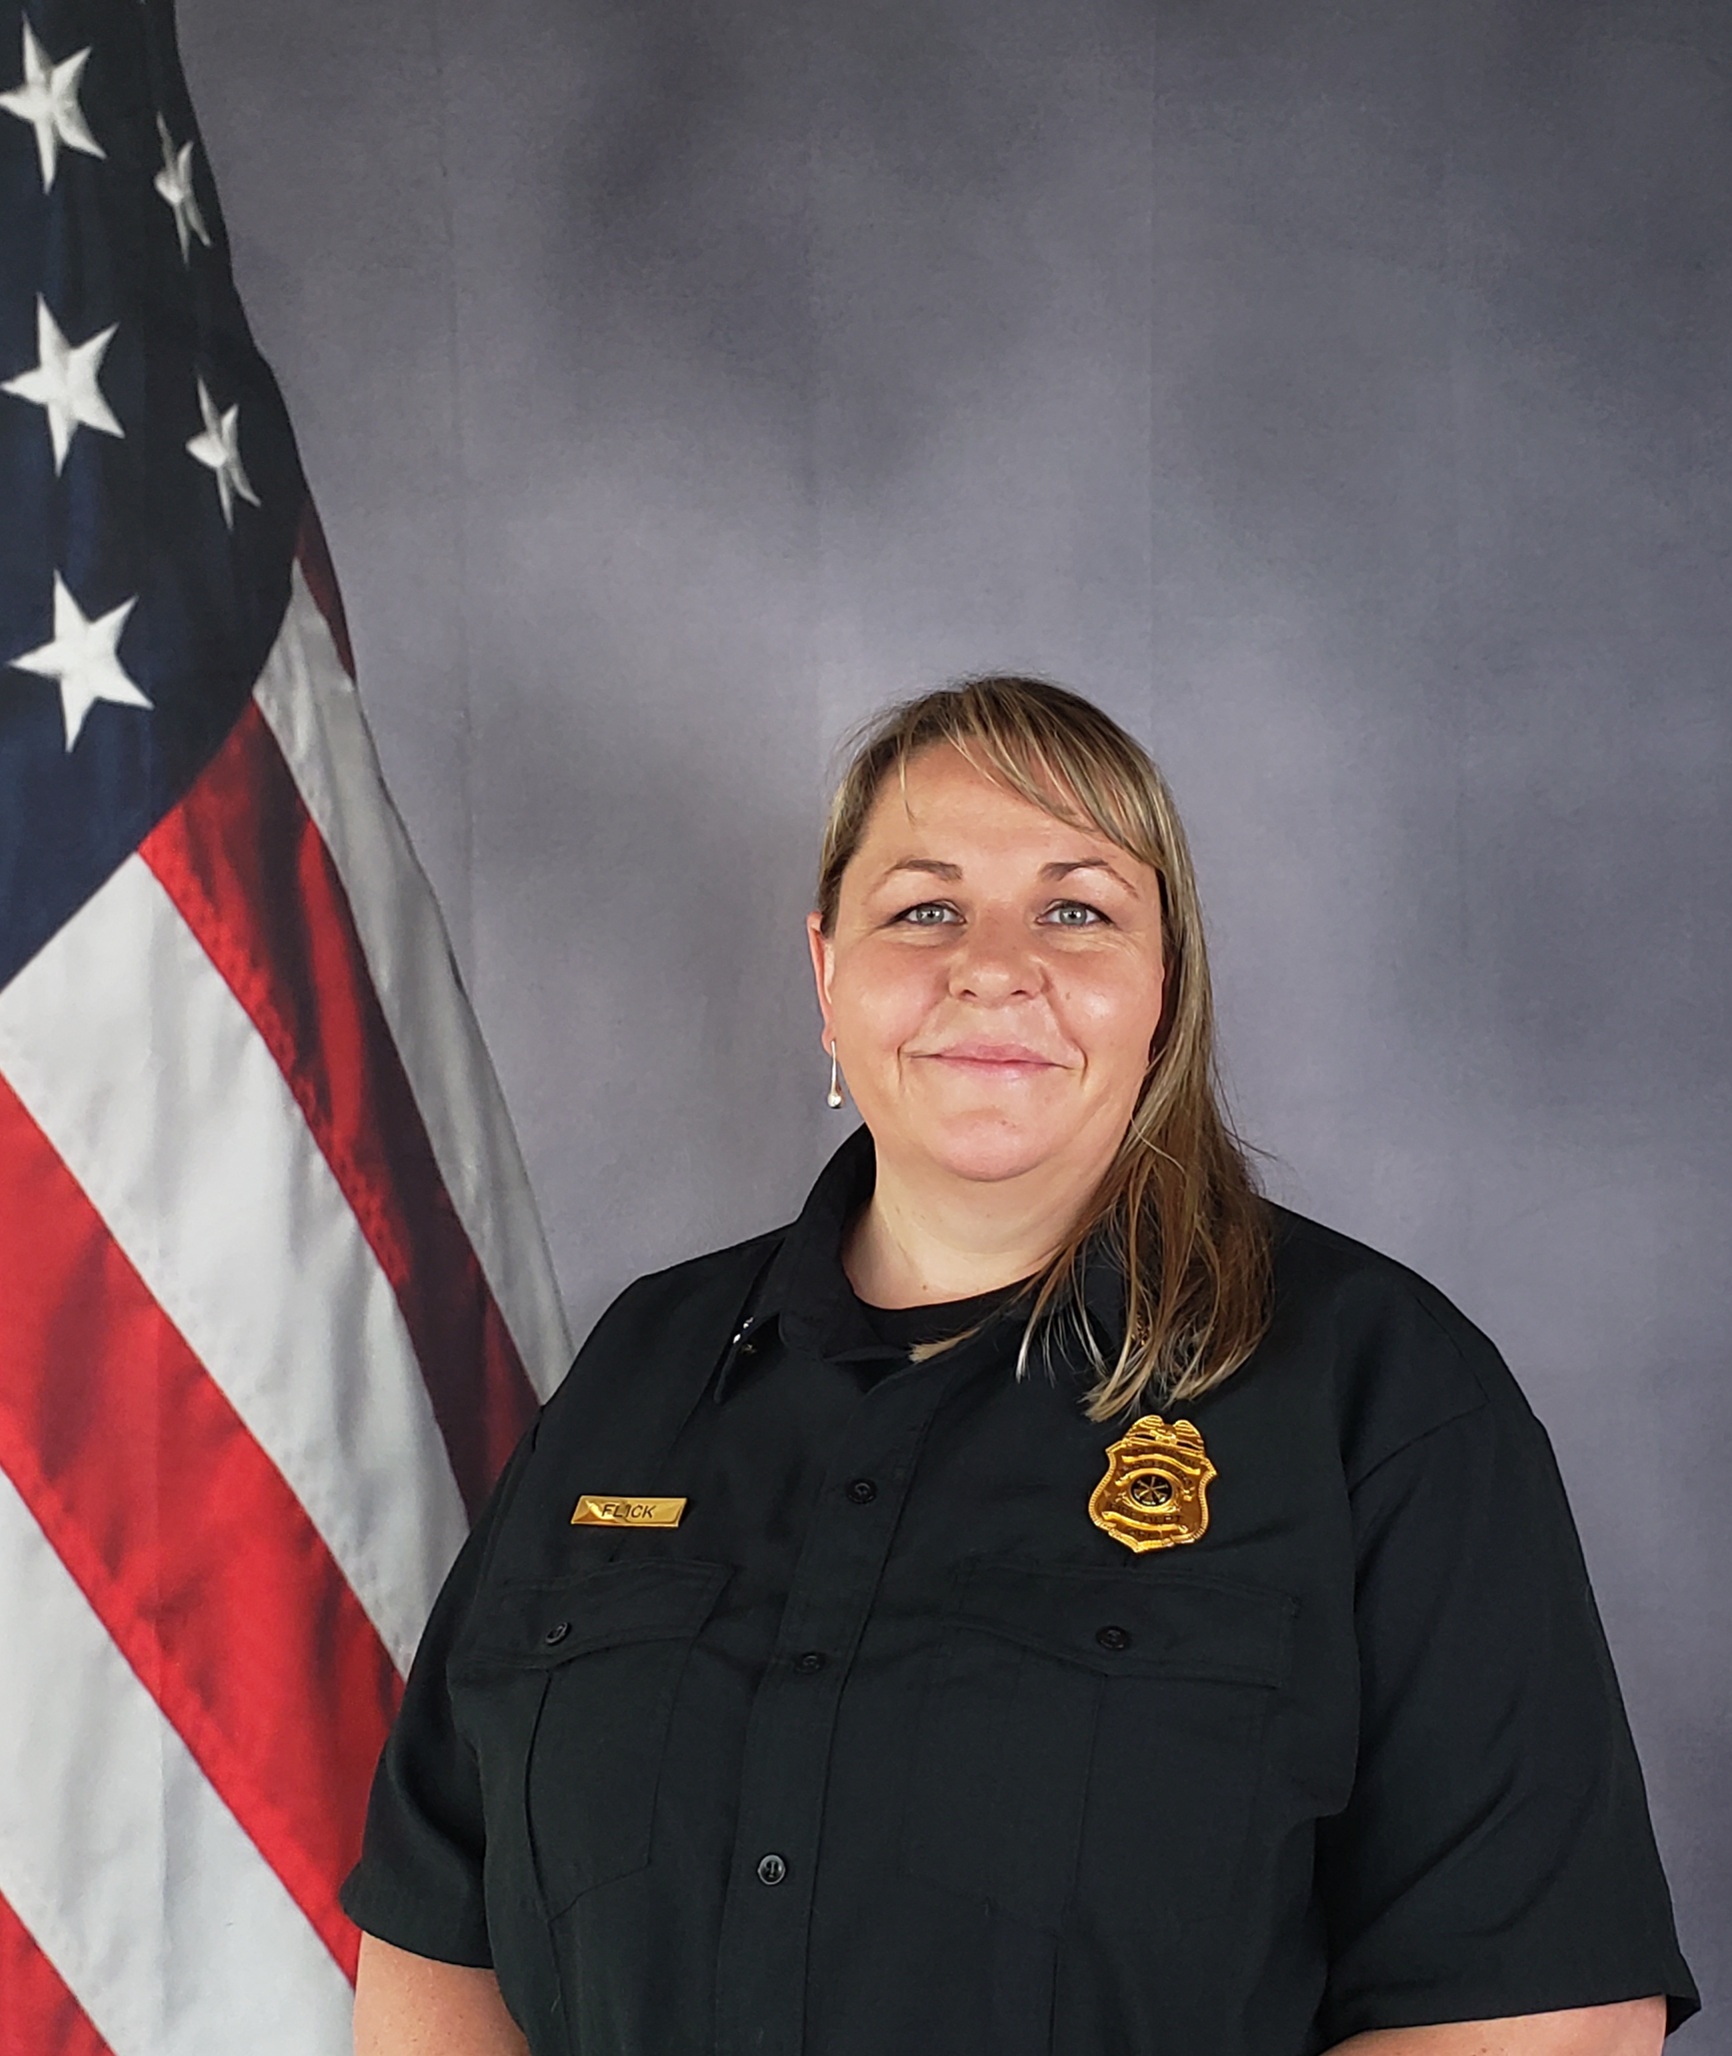 Roseburg Fire Department Announces Hiring of First Female Fire Marshal (Photo) featured image